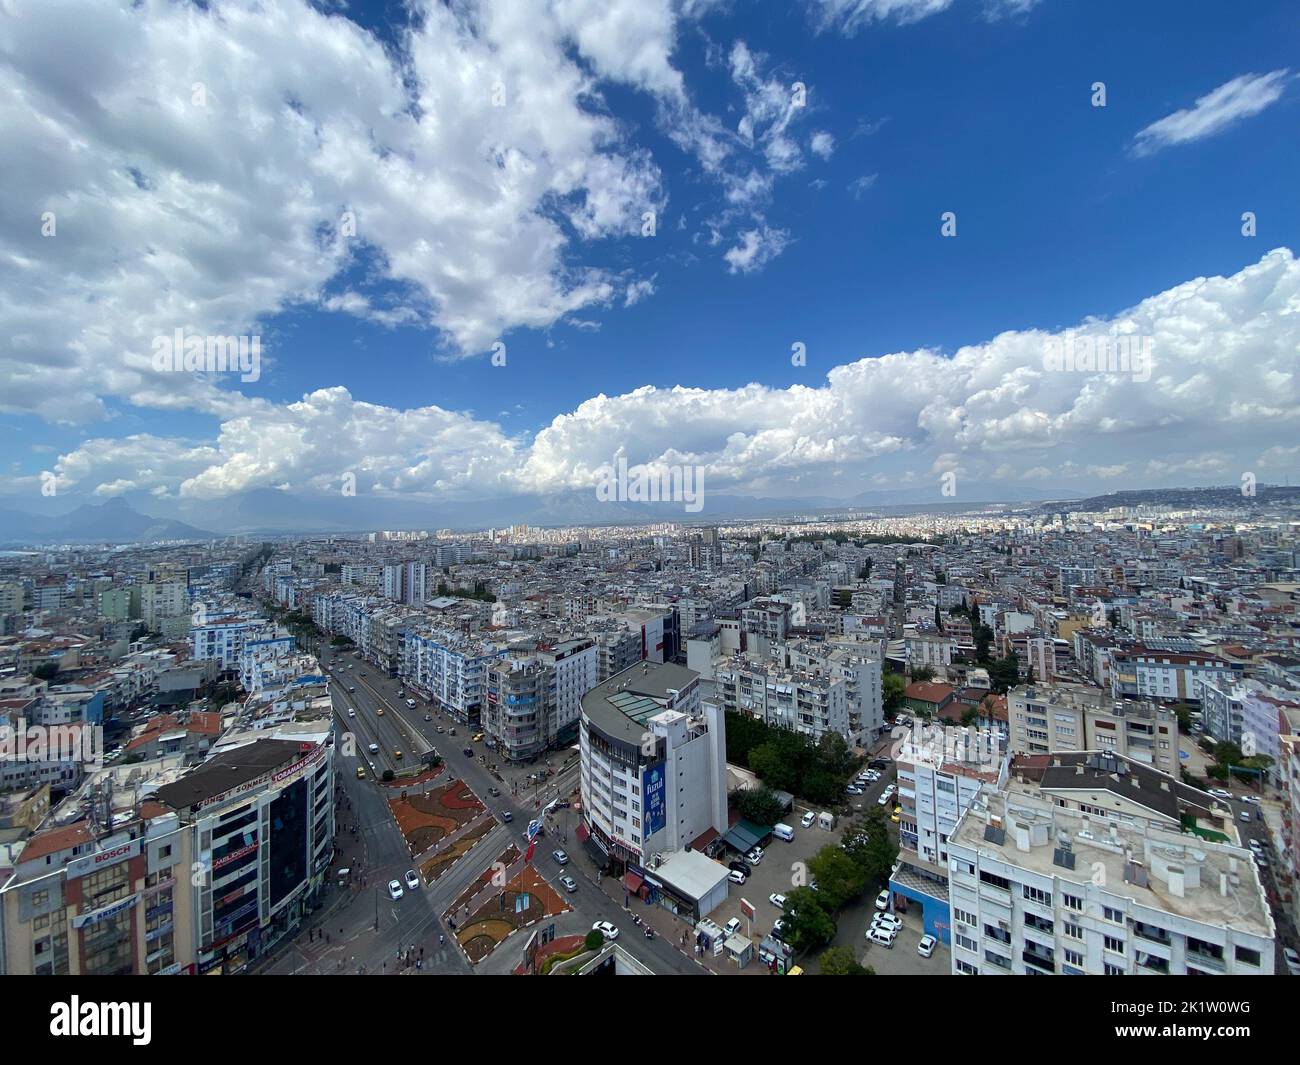 Antalya city view with mountain and cloudy skies. Stock Photo